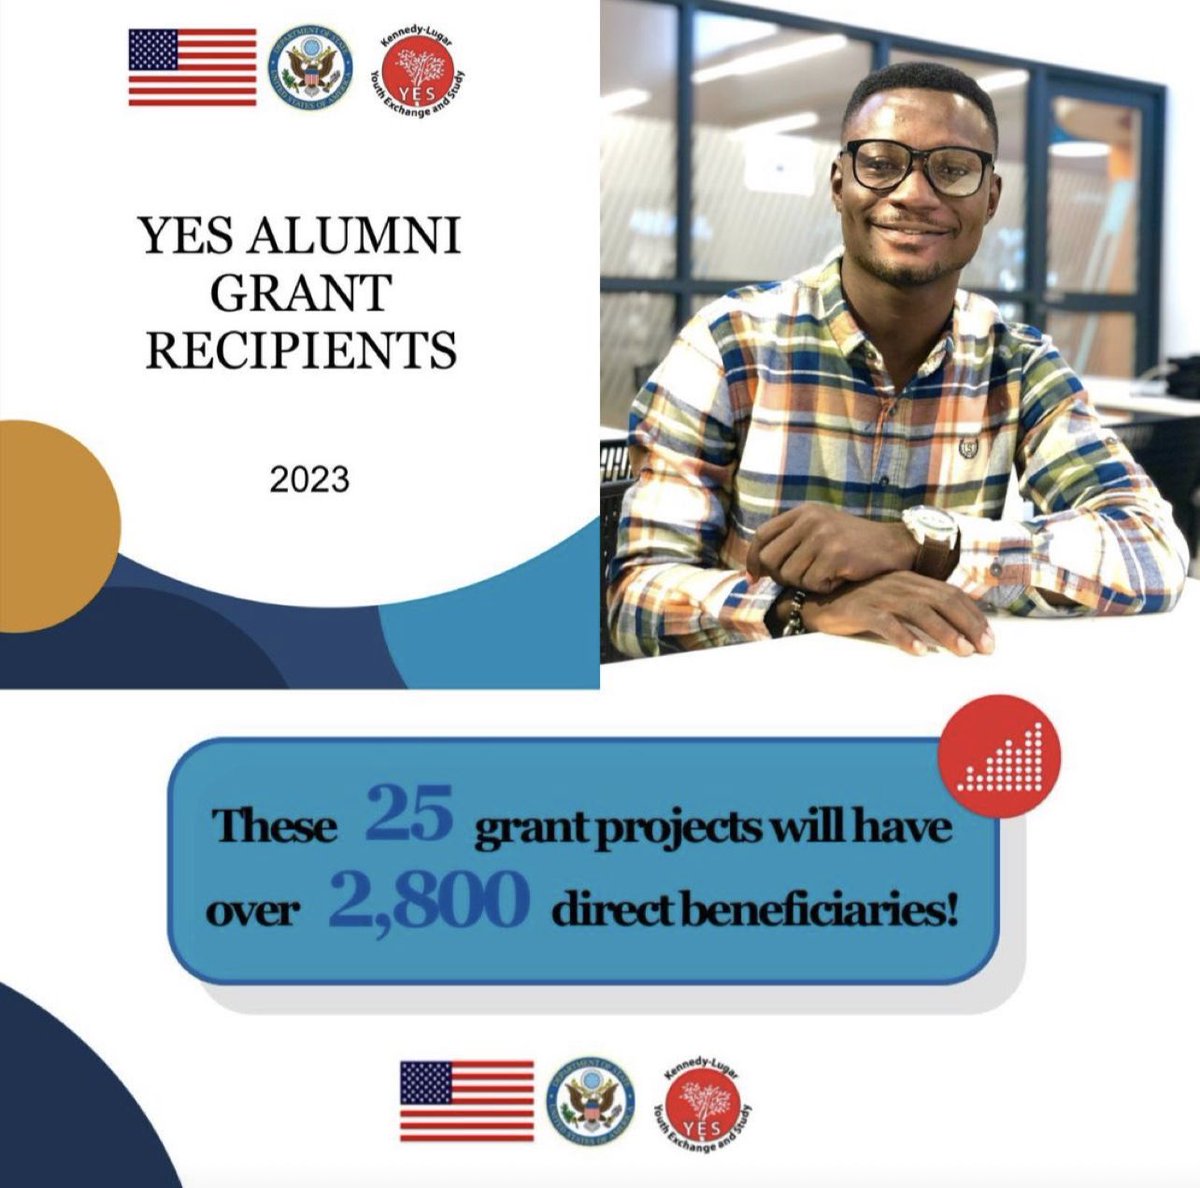 Thrilled to receive the @yesprogramnews Alumni Grant 2023! Excited to work on the 'Reducing Trash while Building Communities' project in Kaduna, Nigeria. Together, we'll up-cycle and and create a more sustainable future! ♻️💚 
#KLYES #Yesalumni #Upcycling #BuildingCommunities